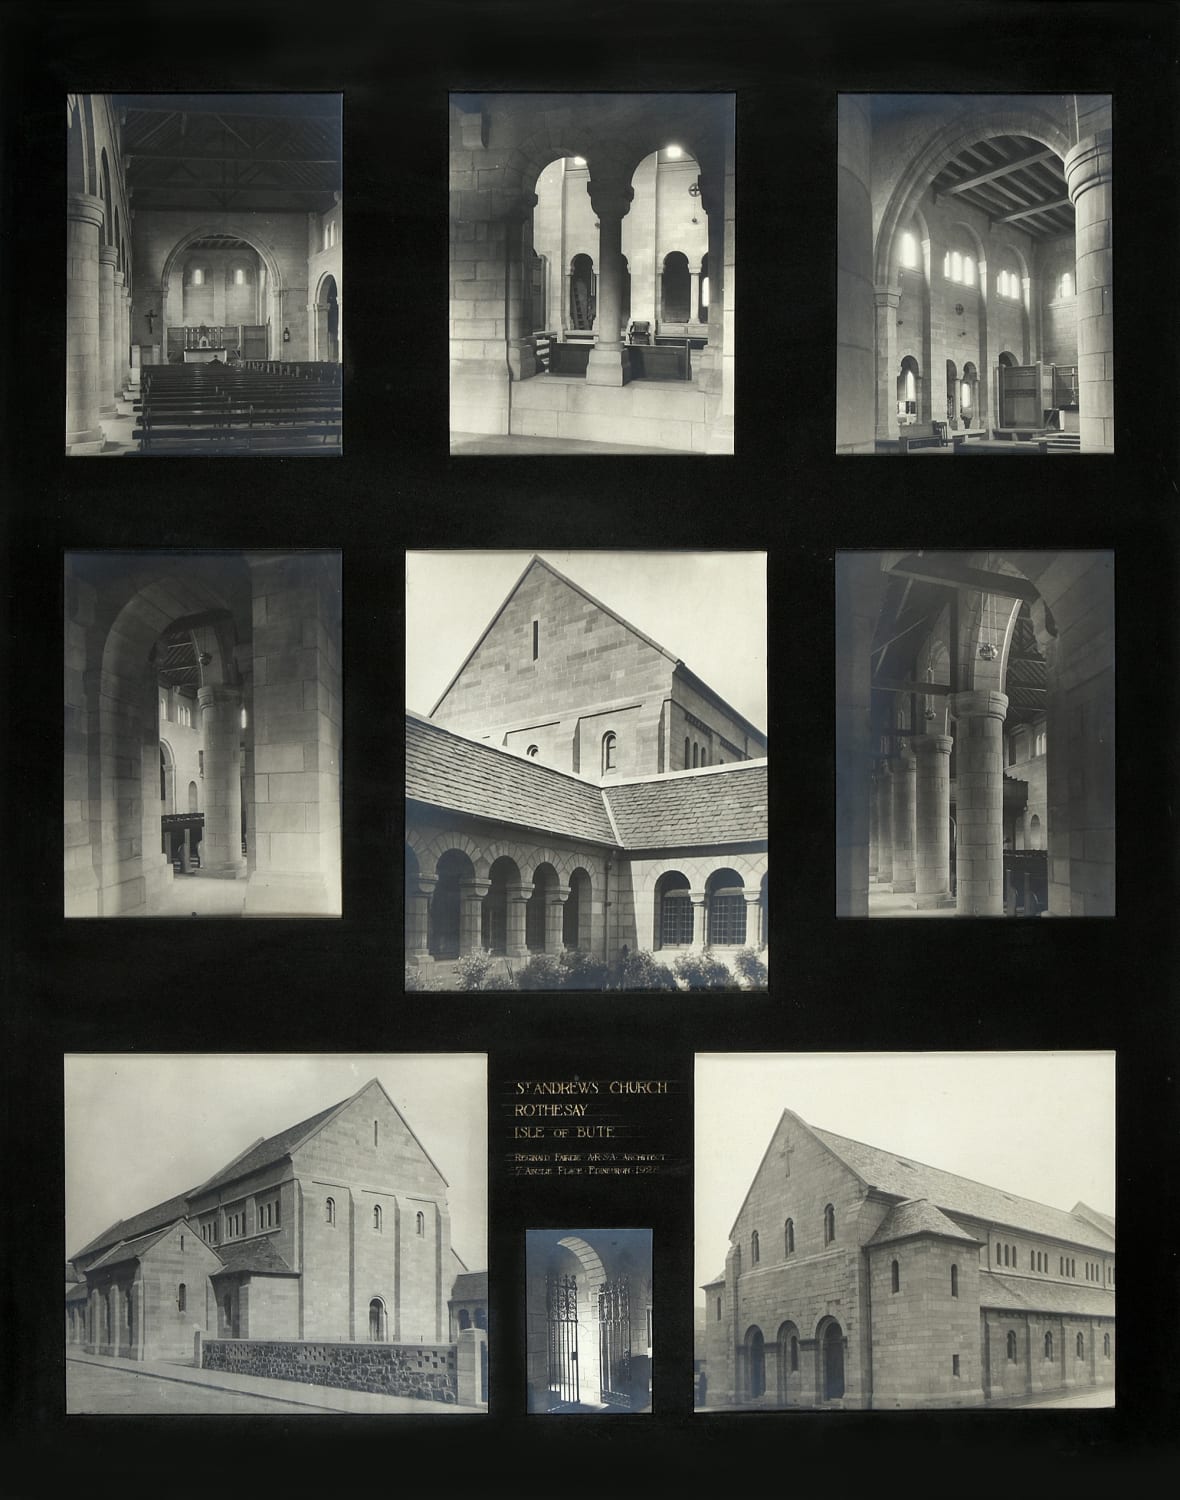 Reginald Fairlie RSA (1883-1952), St Andrews Church, Rothesay, Isle of Bute (x9 mounted photos)  Photograph, 1928, 99.6 x 80 cm  RSA Diploma Collection Deposit, 1993.111